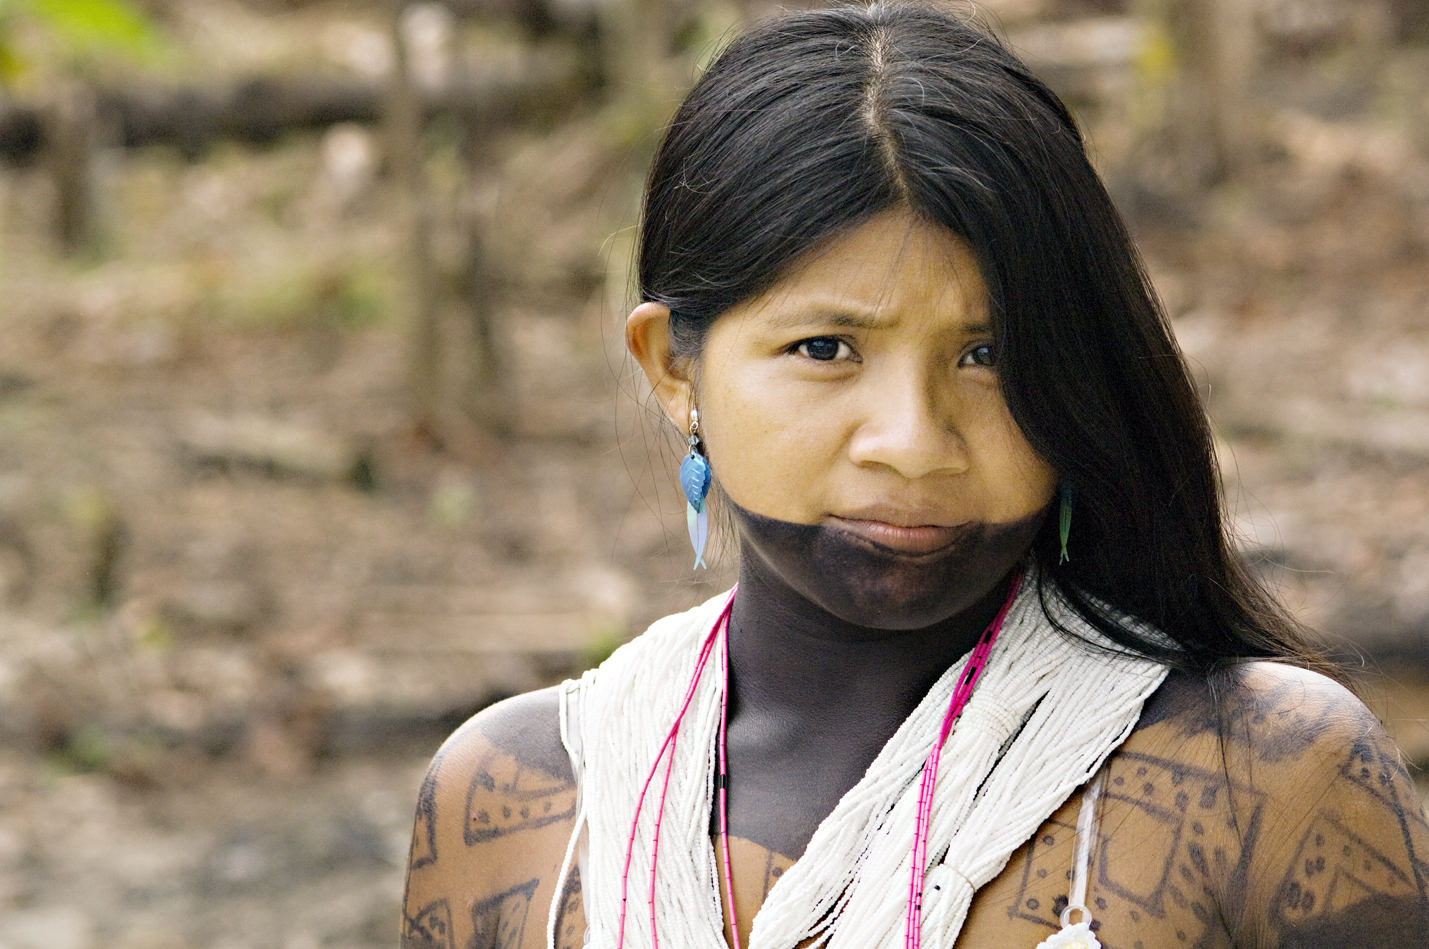 Protecting the Indigenous People of the Amazon